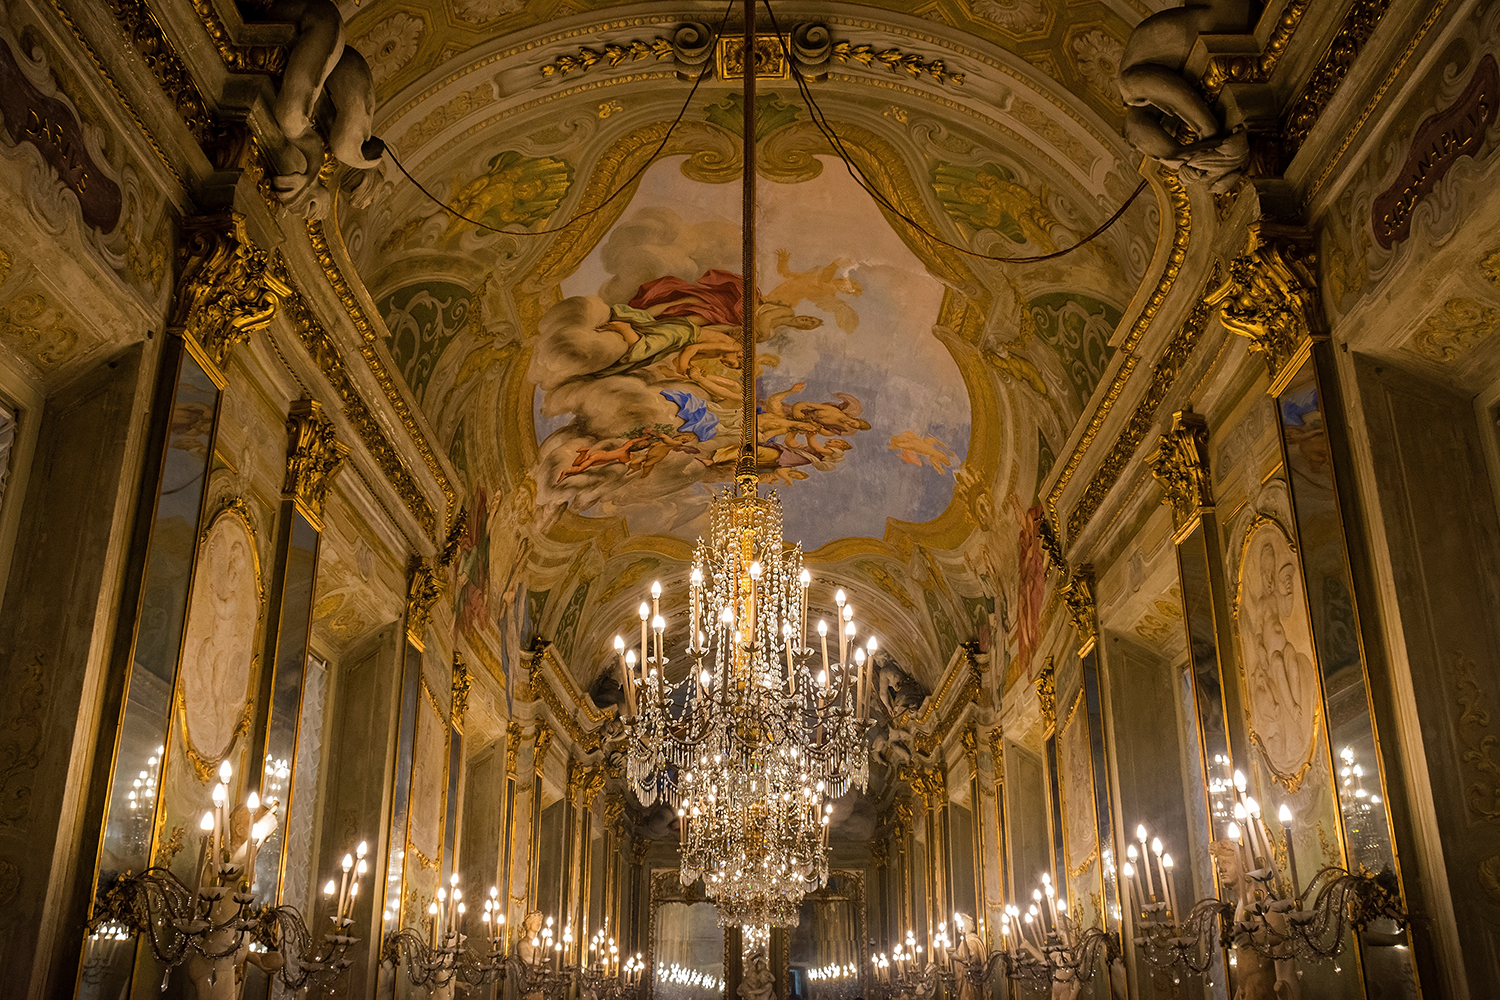 The hall of mirrors...